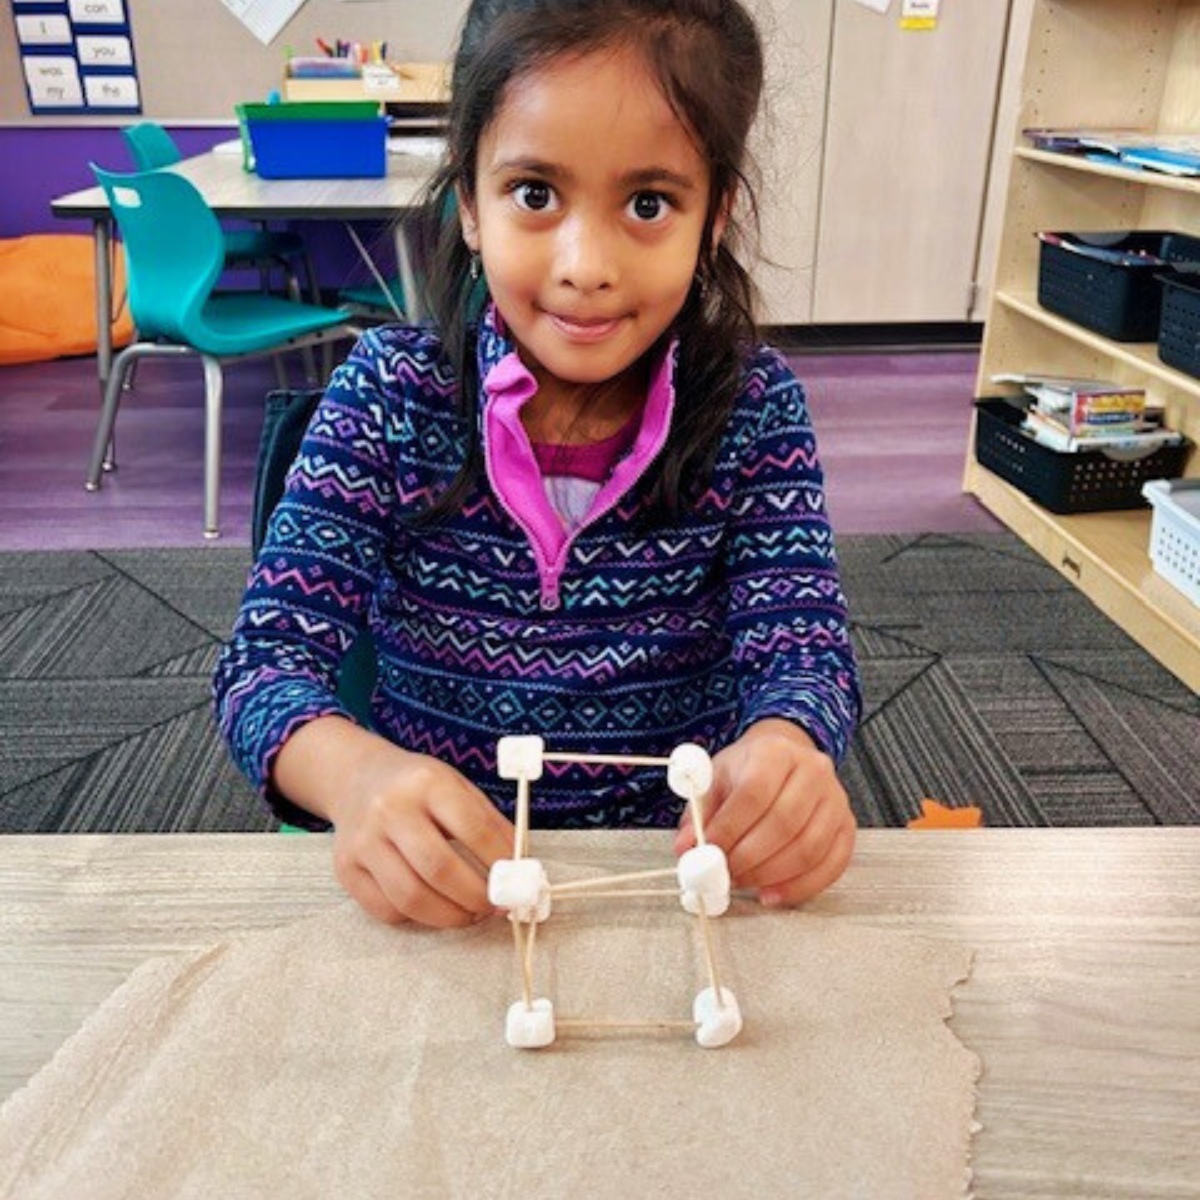 Students show off their 3D models made with marshmallows and noodles.